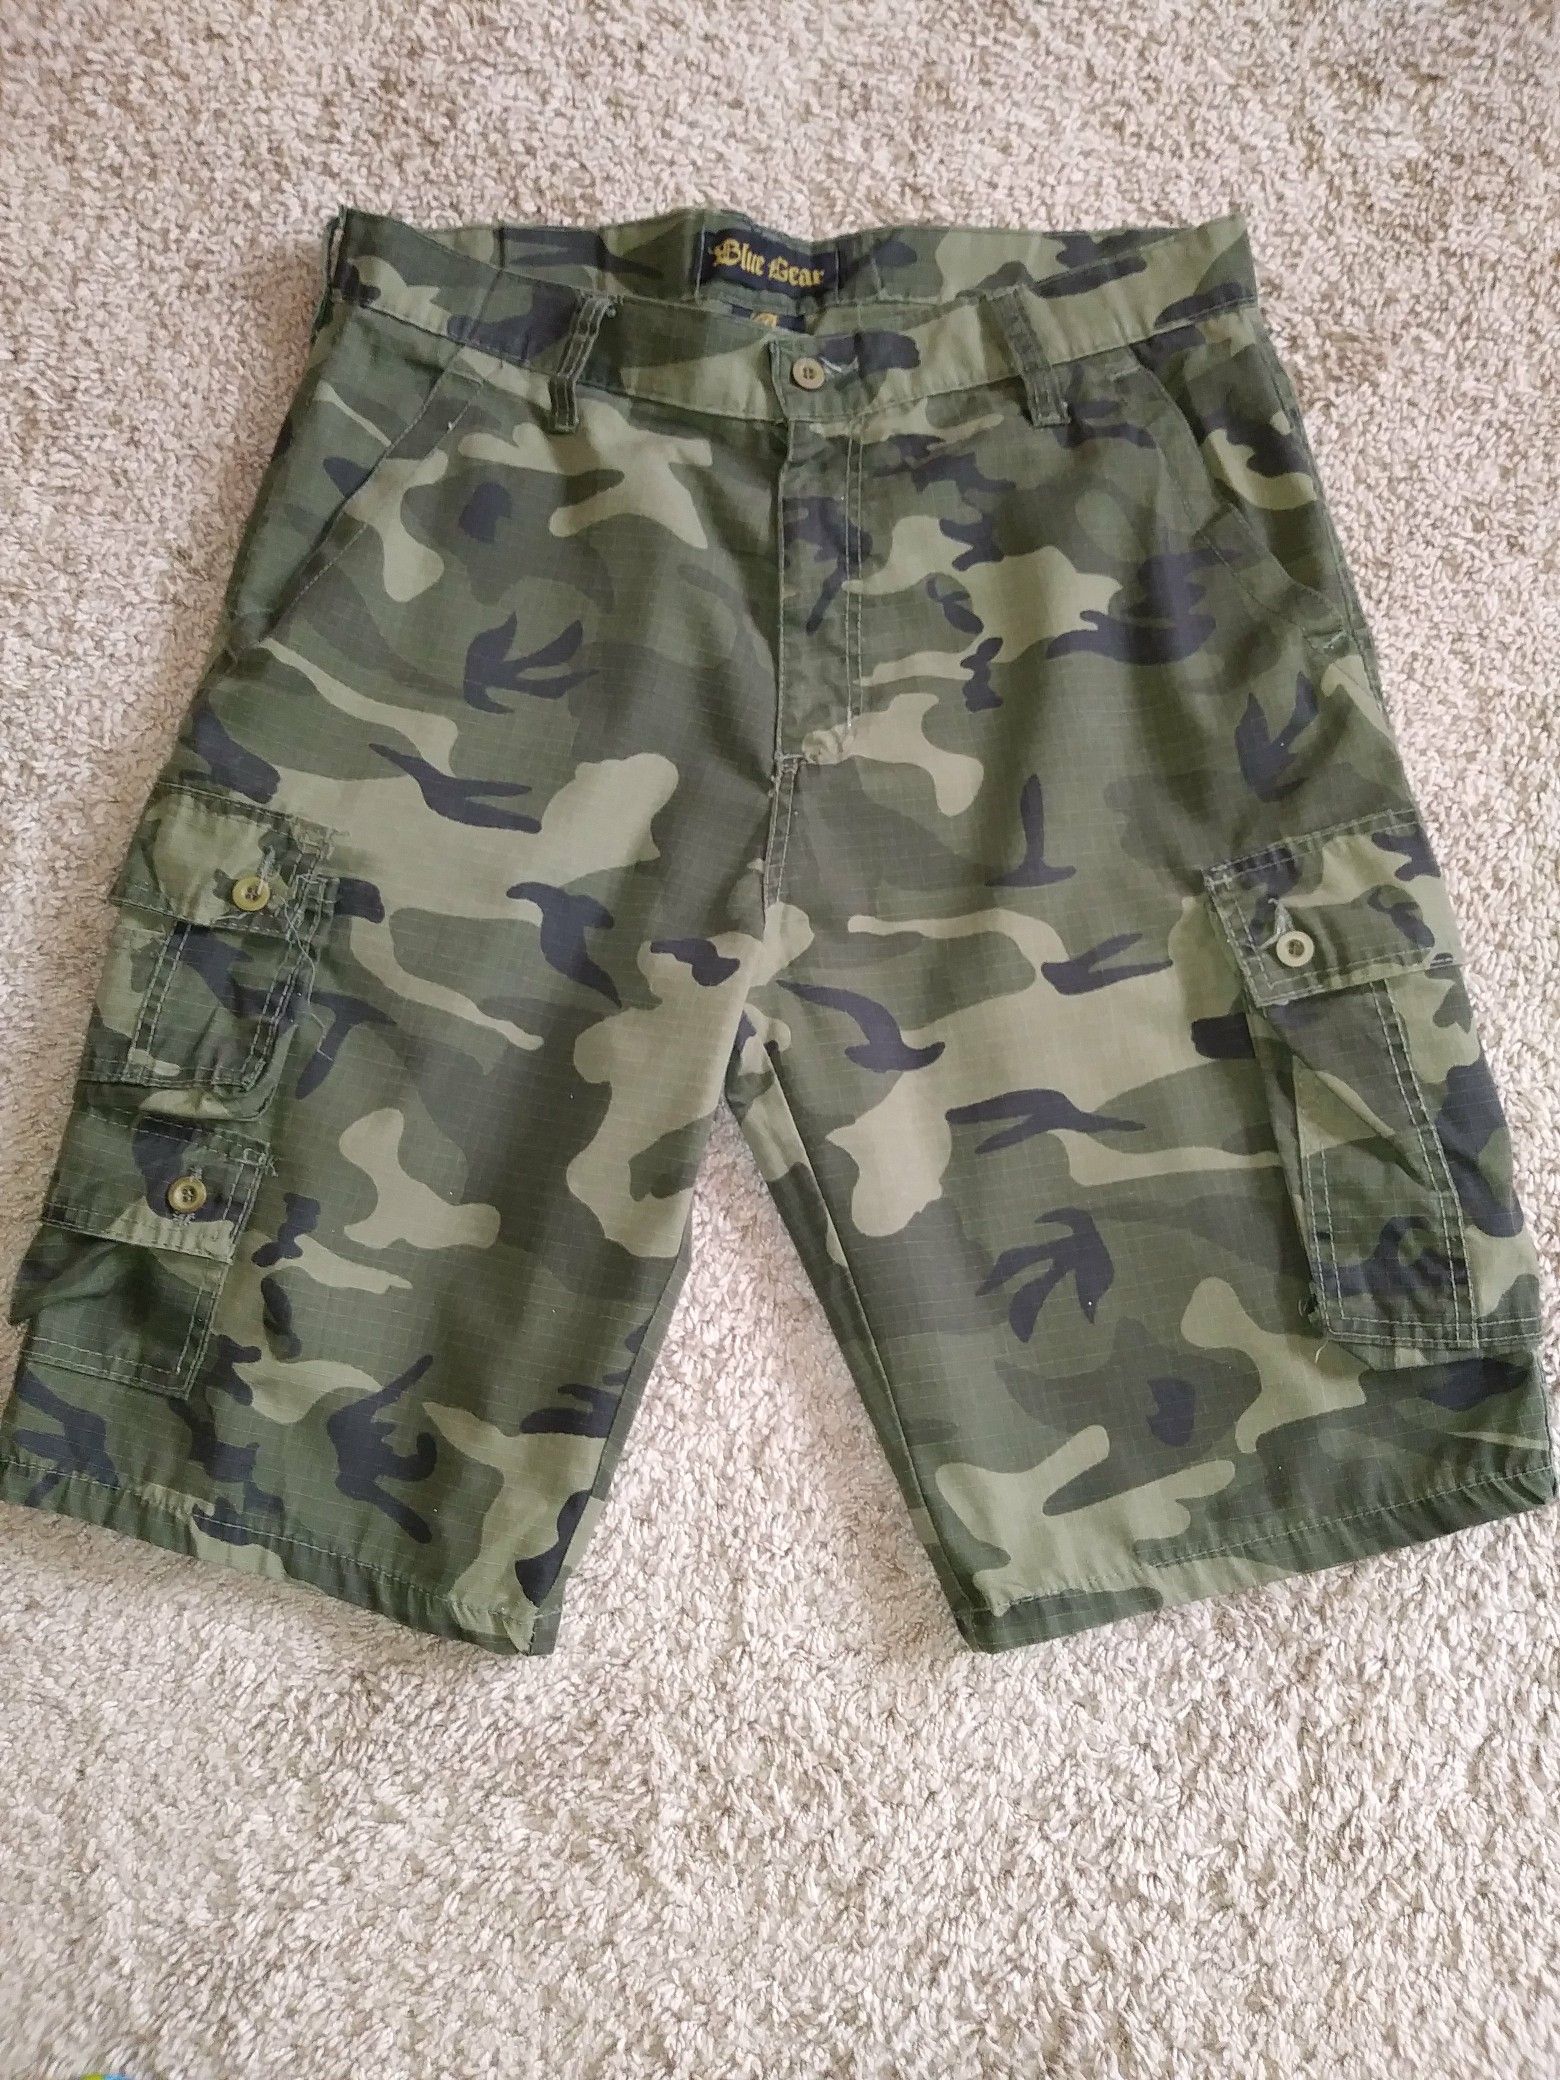 Camo cargo shorts Mens size 36 loose fit like new condition